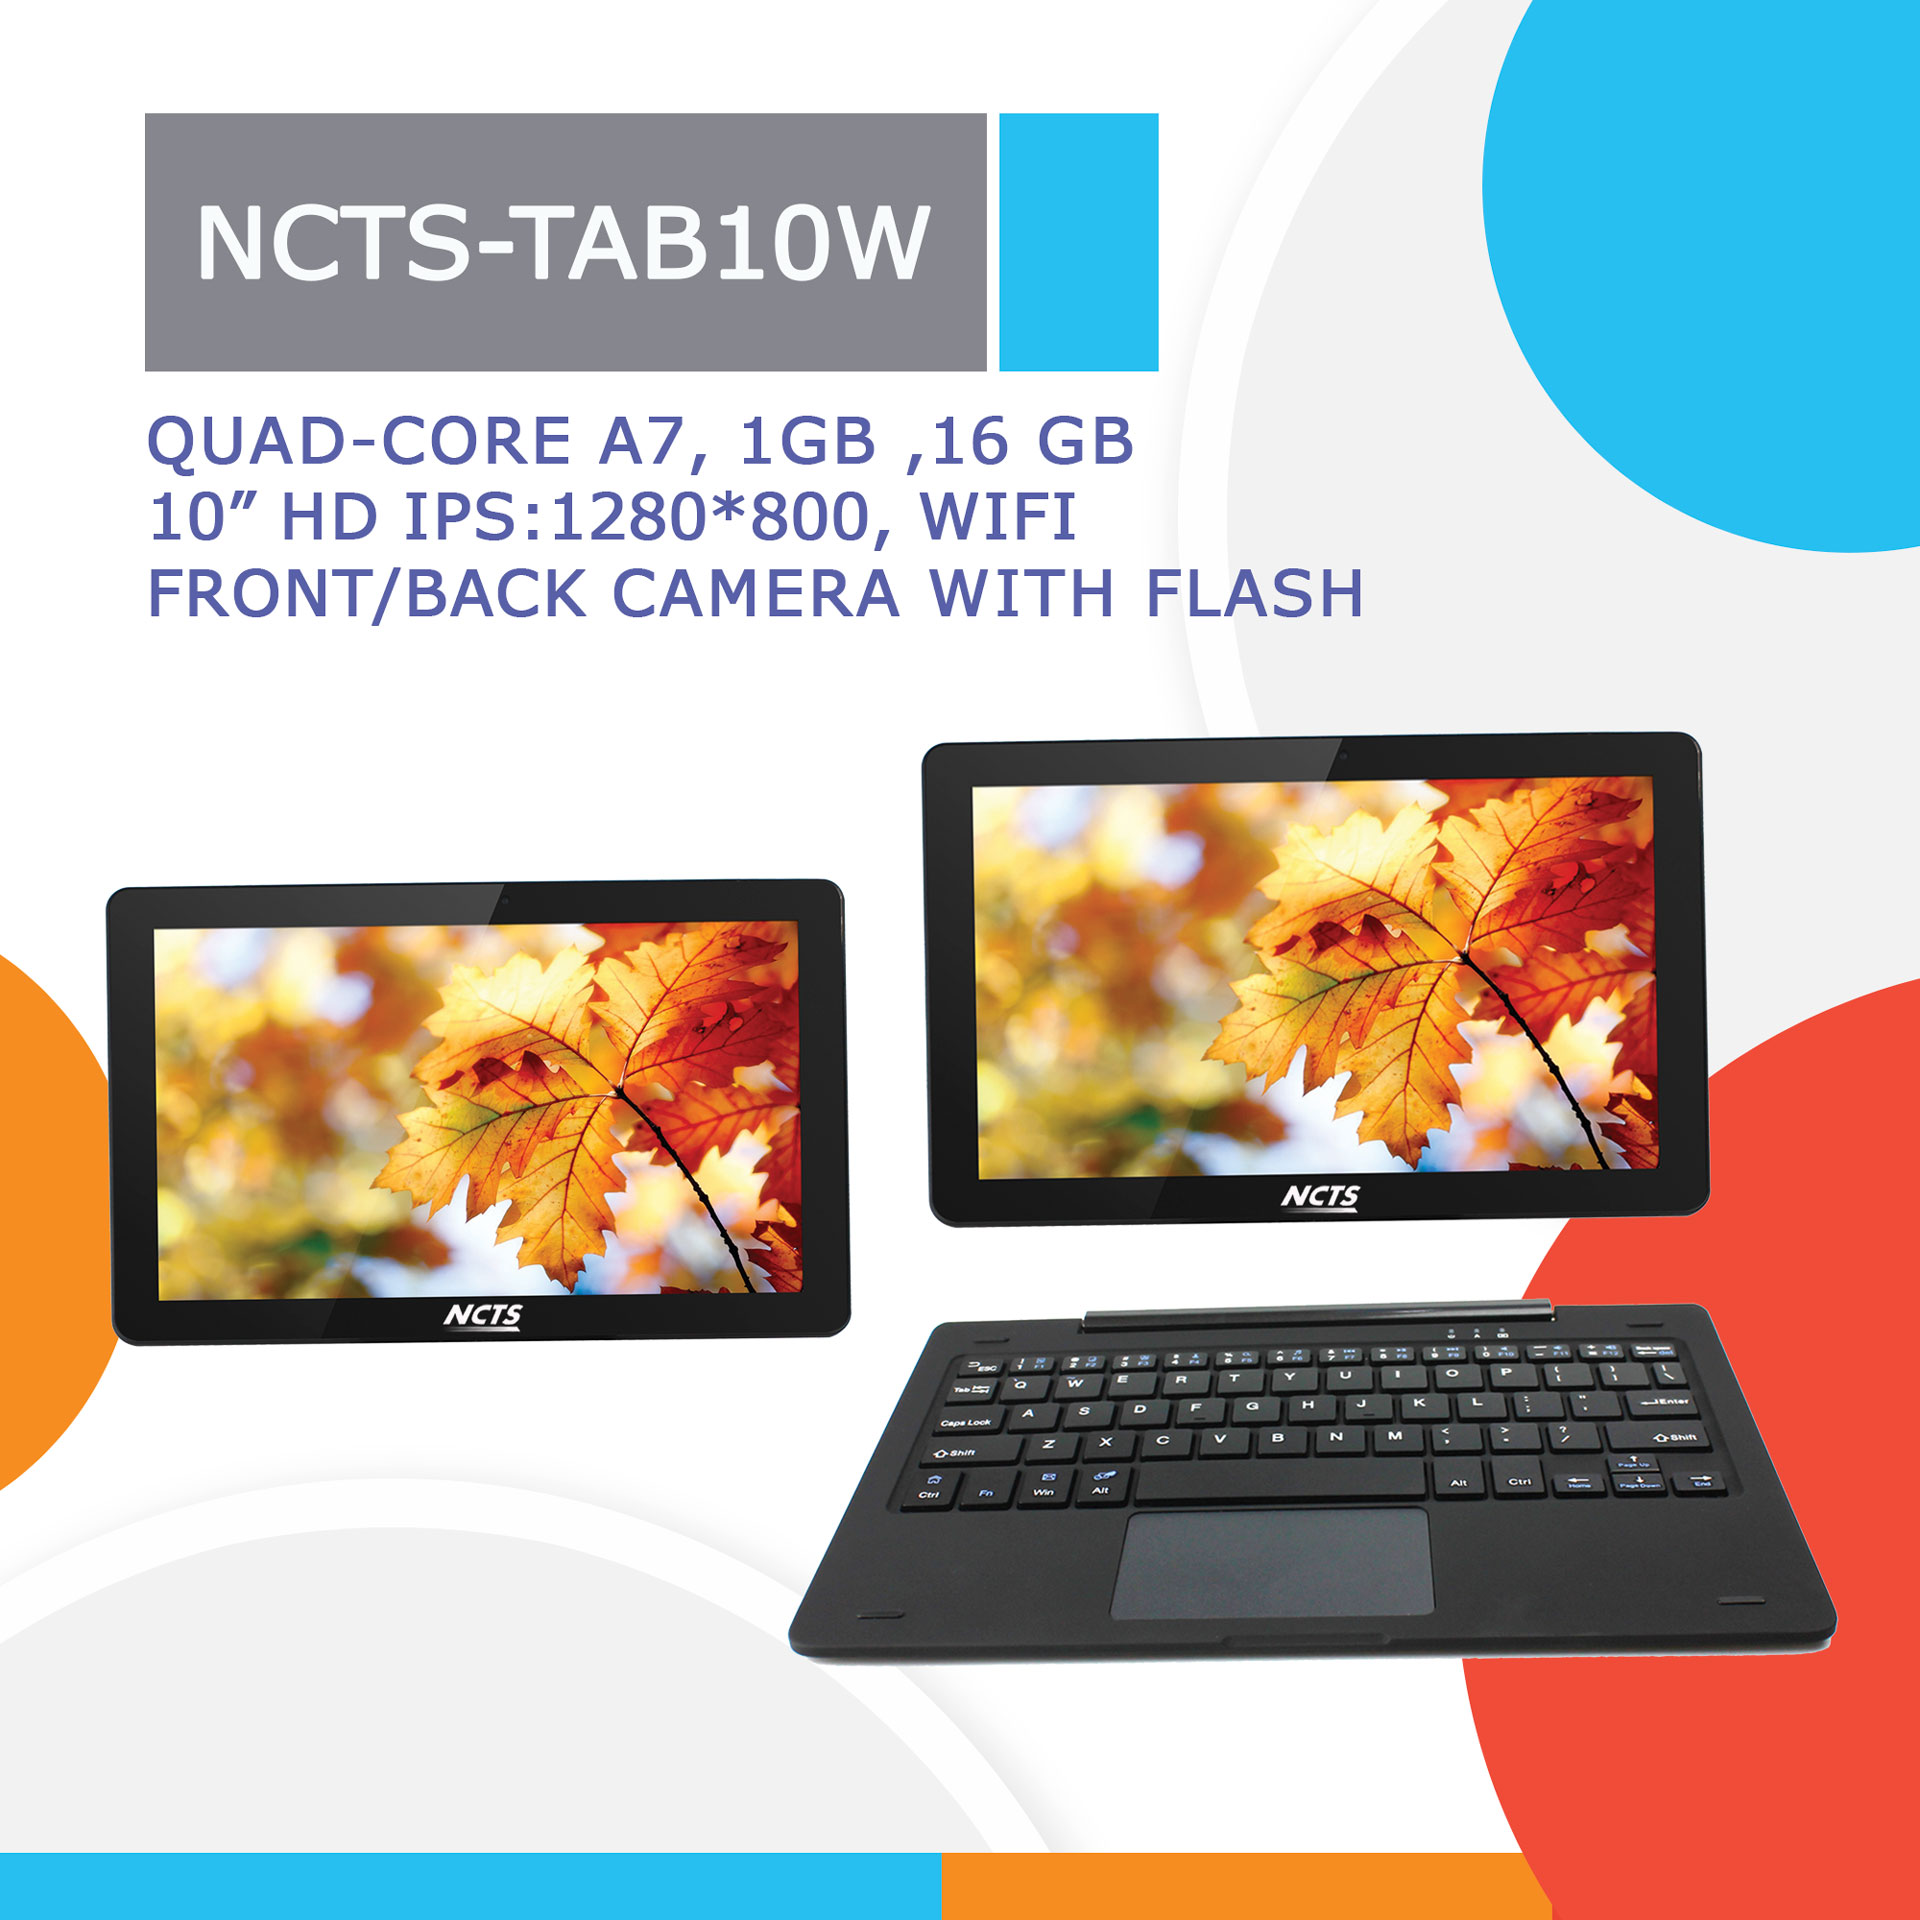 NCTS-TAB10W